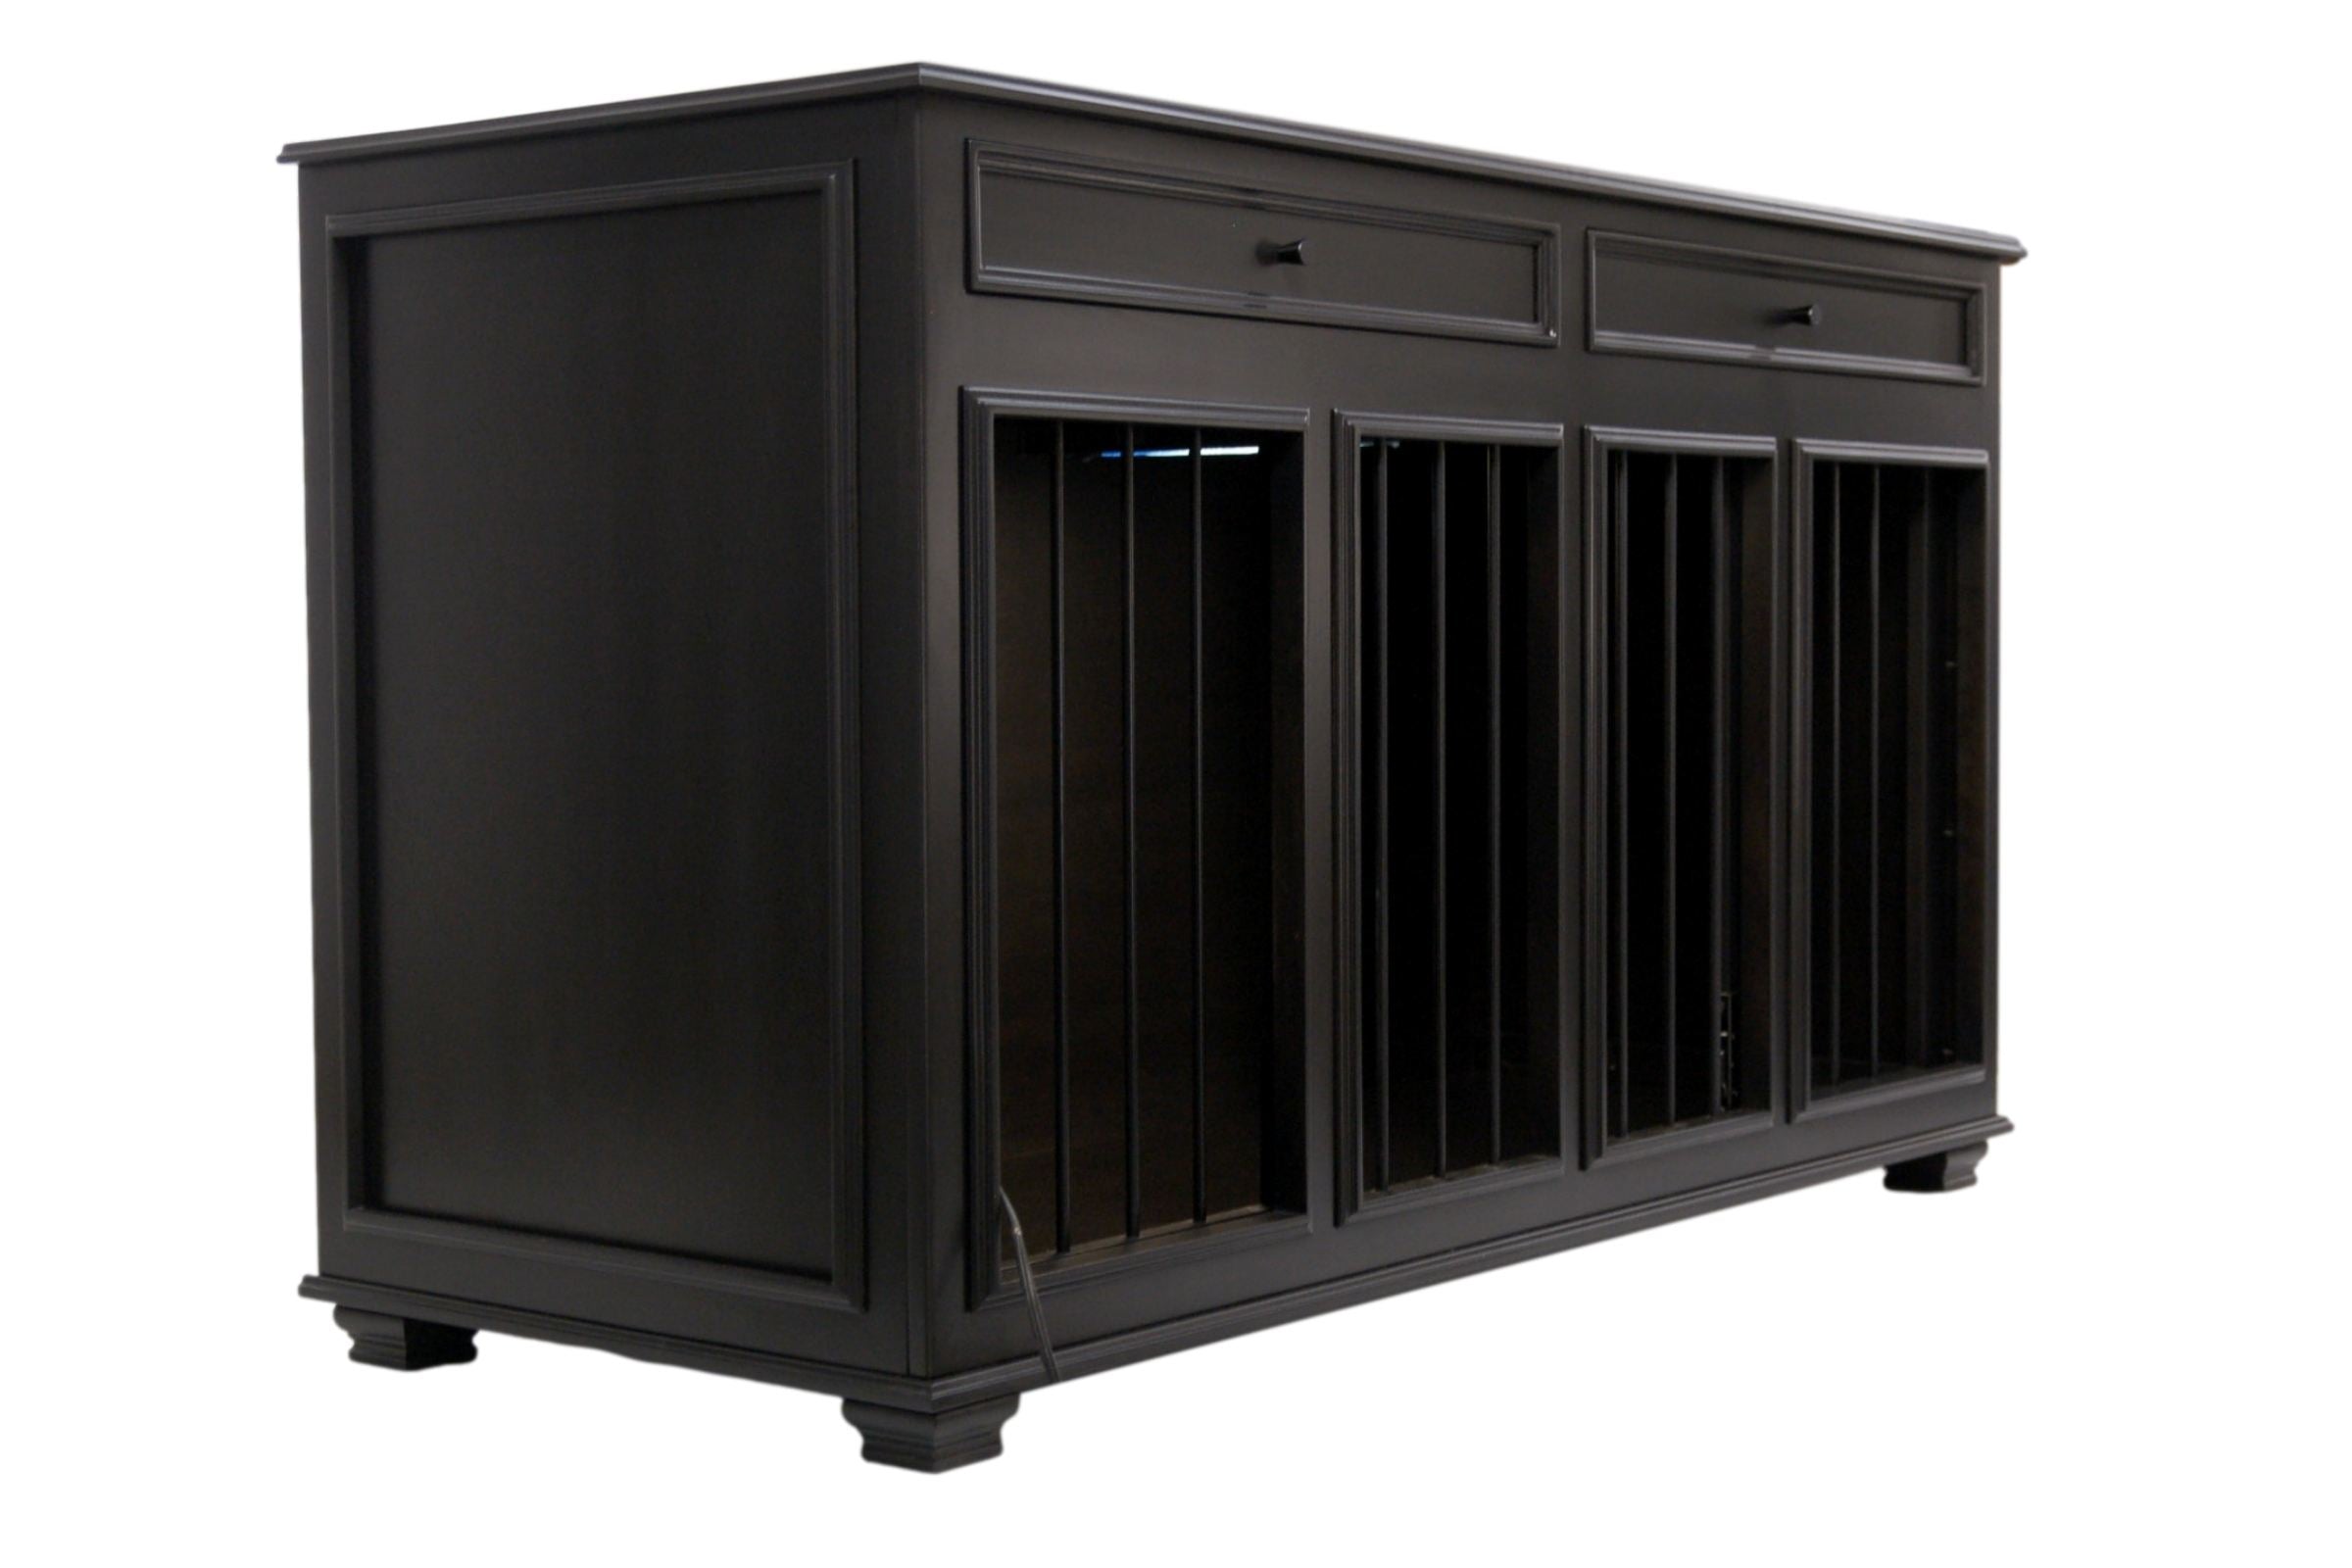 For Gus & Charlie, Shelby Collection, Triple, Custom Luxury Furniture, up to 39 cubic feet